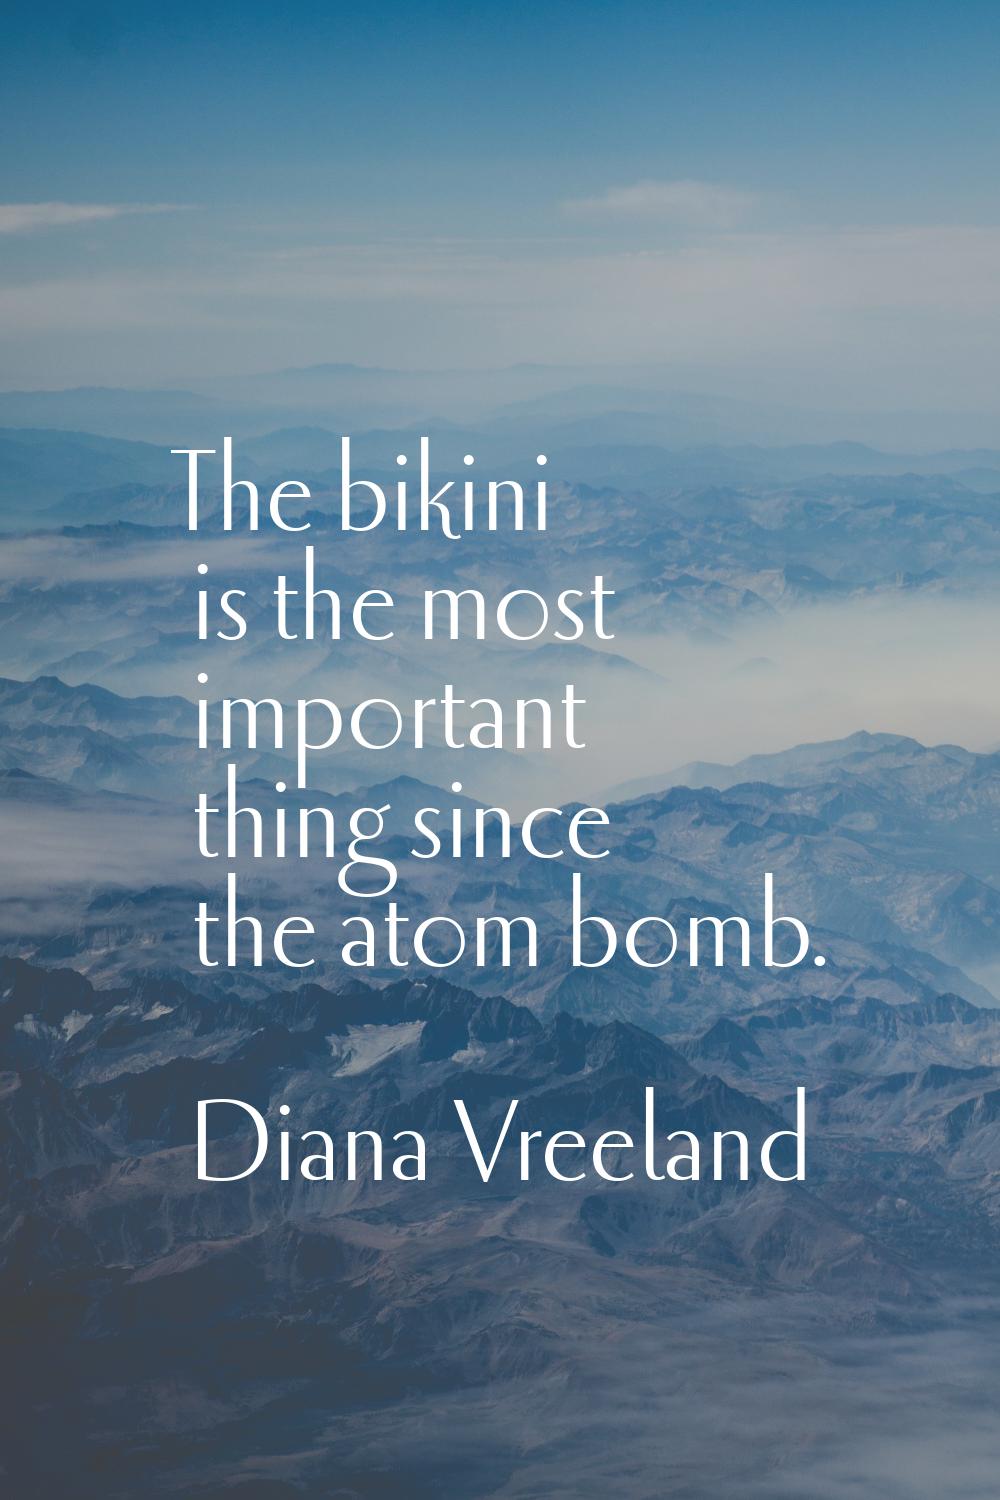 The bikini is the most important thing since the atom bomb.